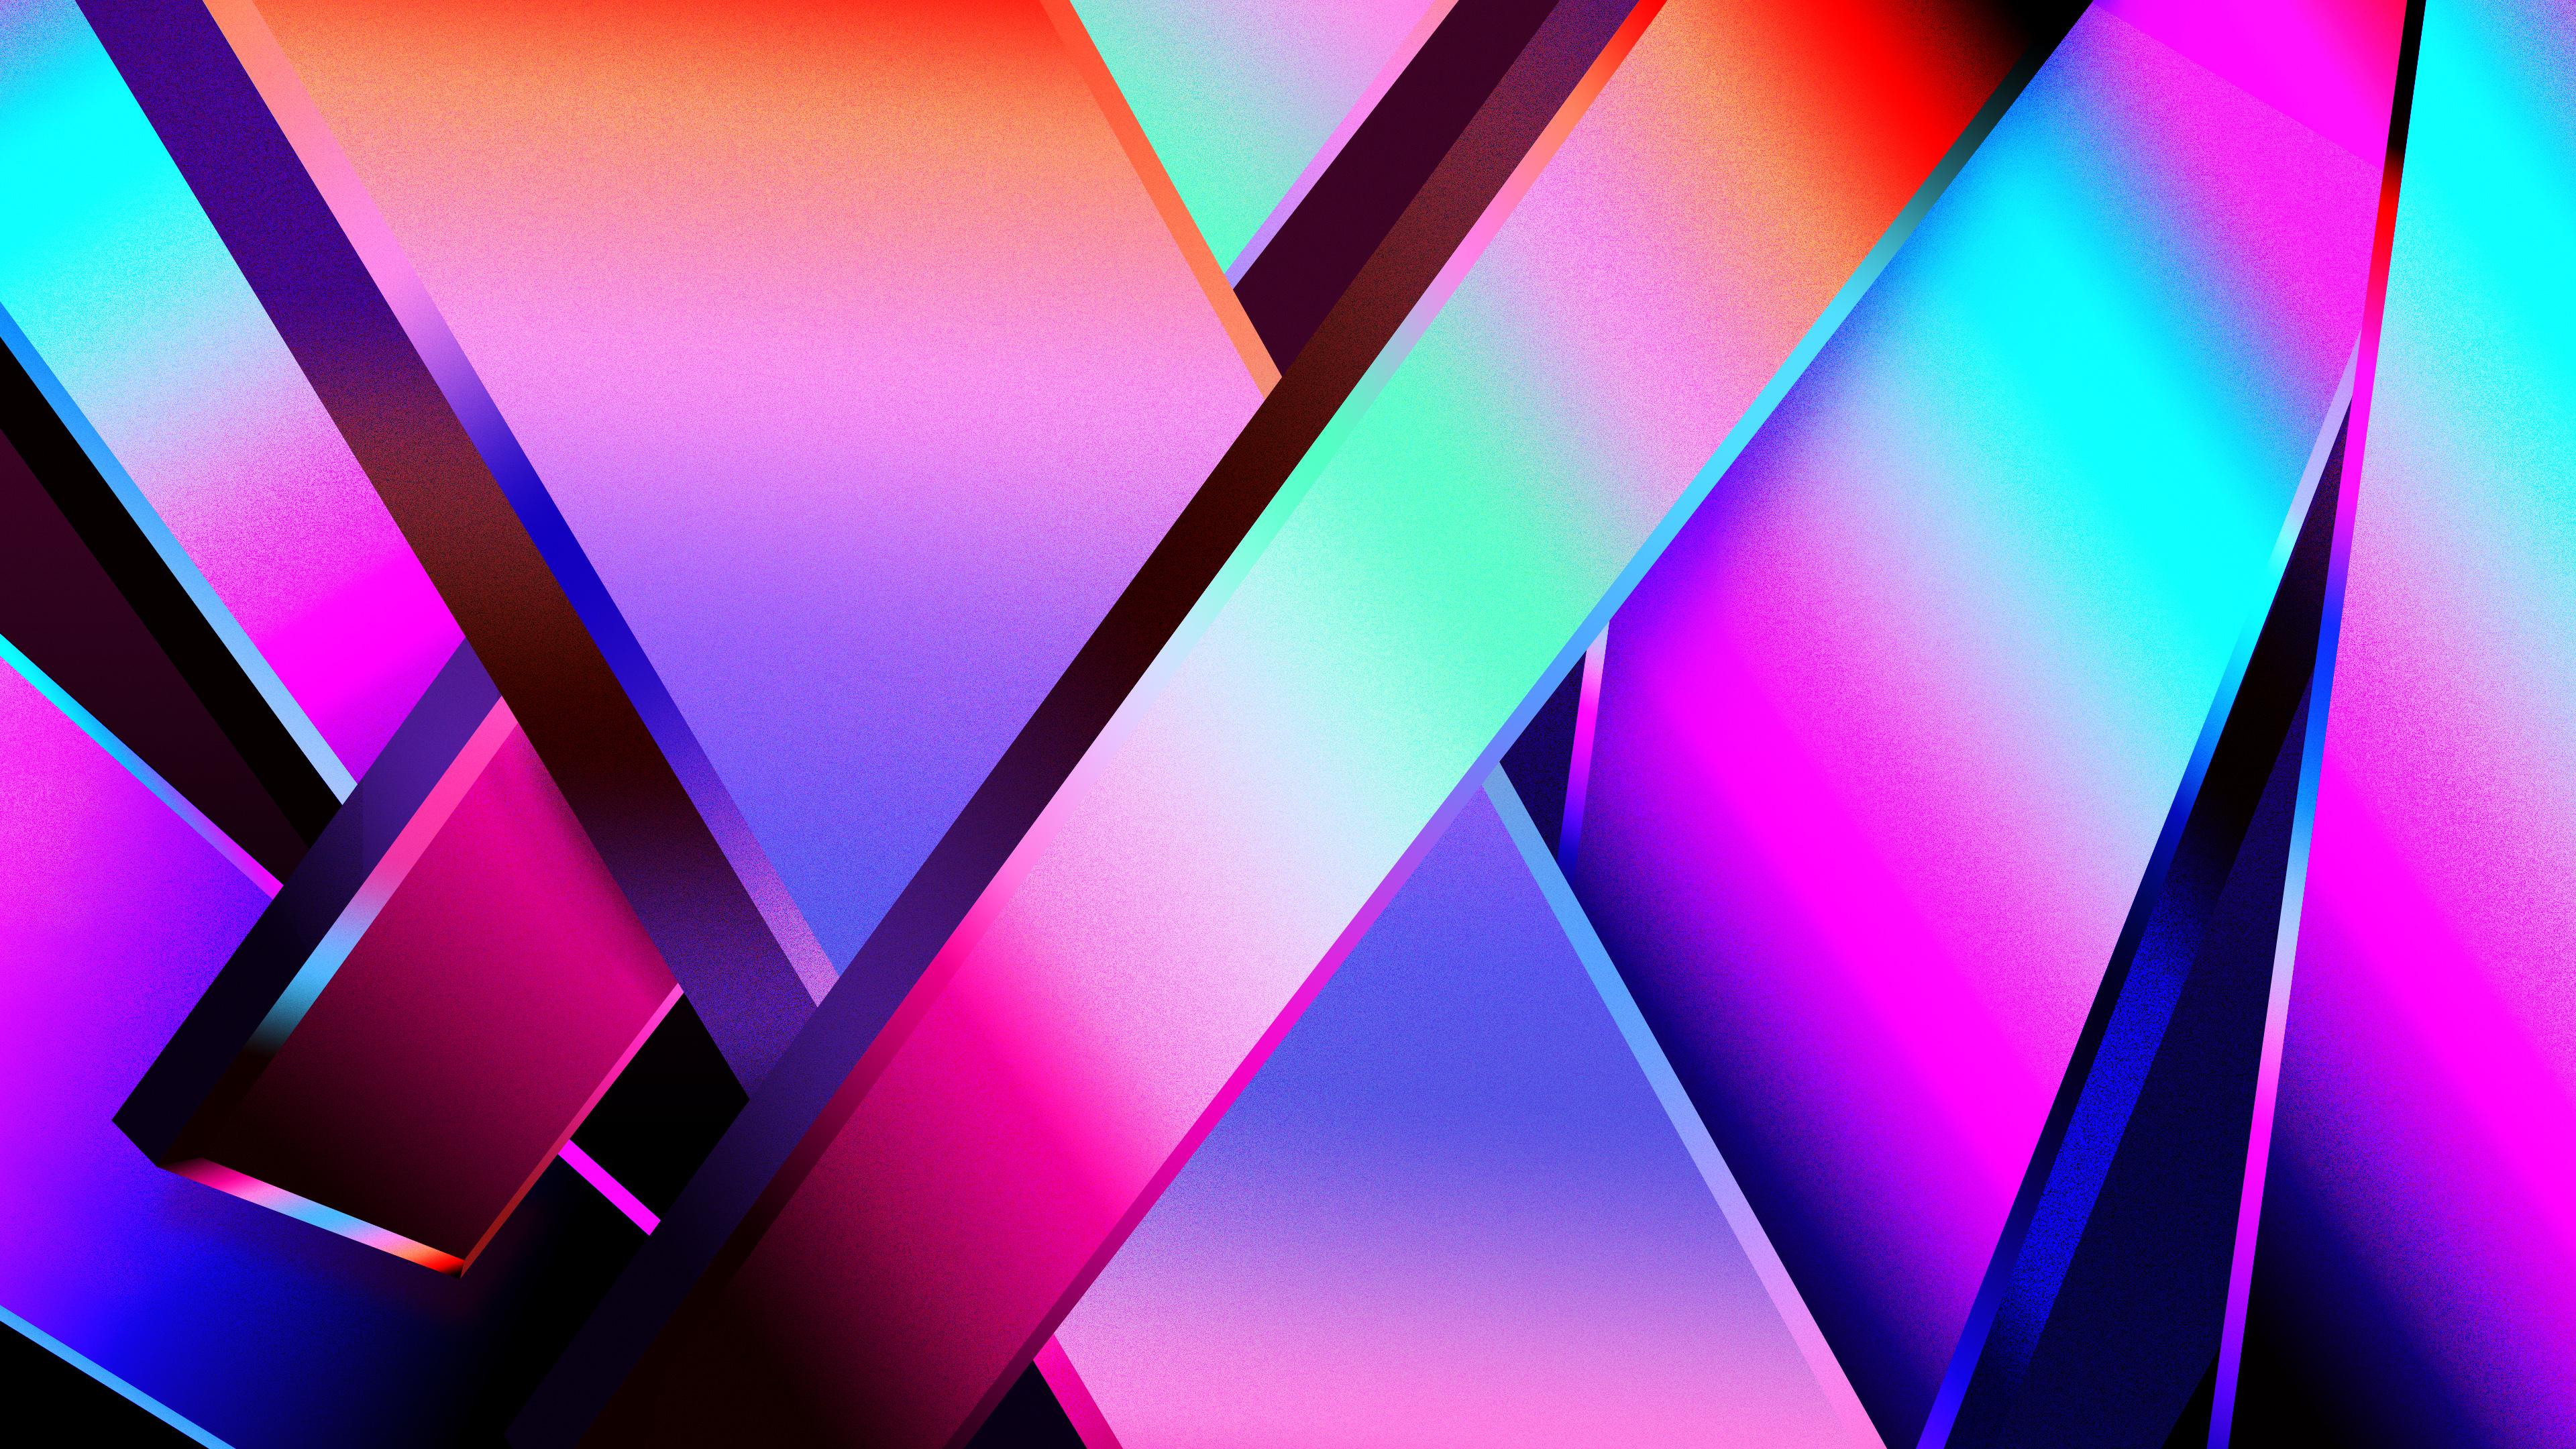 Colors 4K wallpaper for your desktop or mobile screen free and easy to download